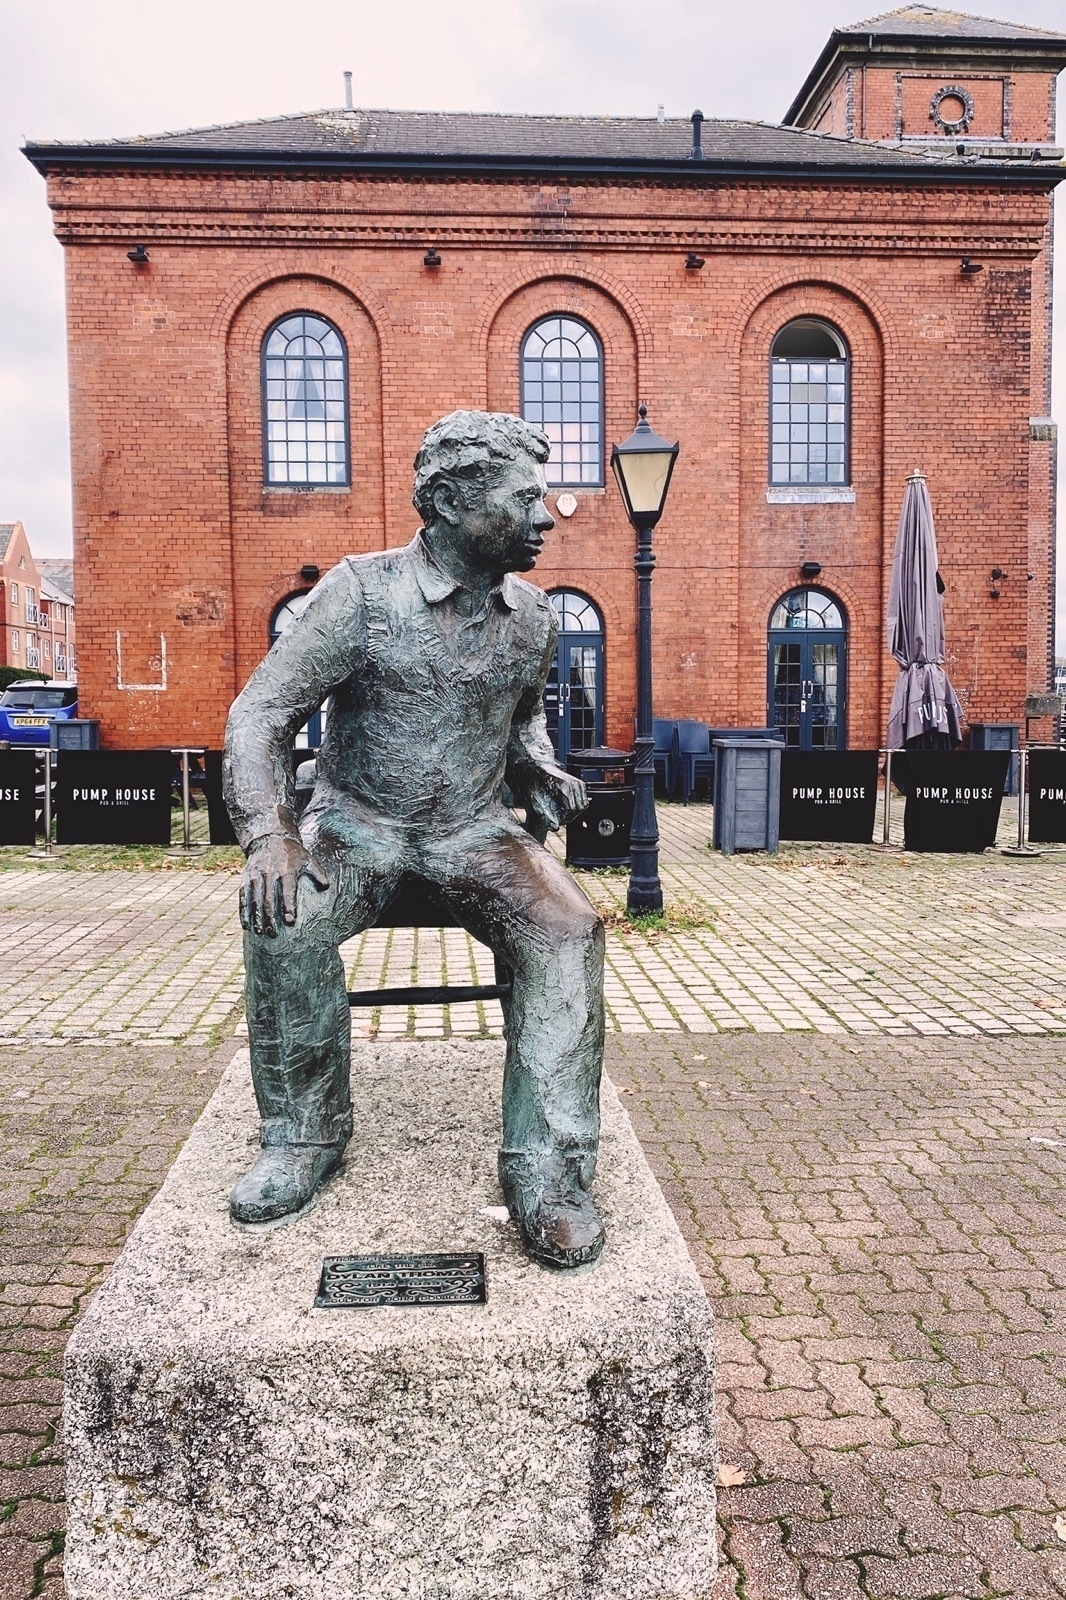 Statue of a seated man on a stone block in front of a red brick building